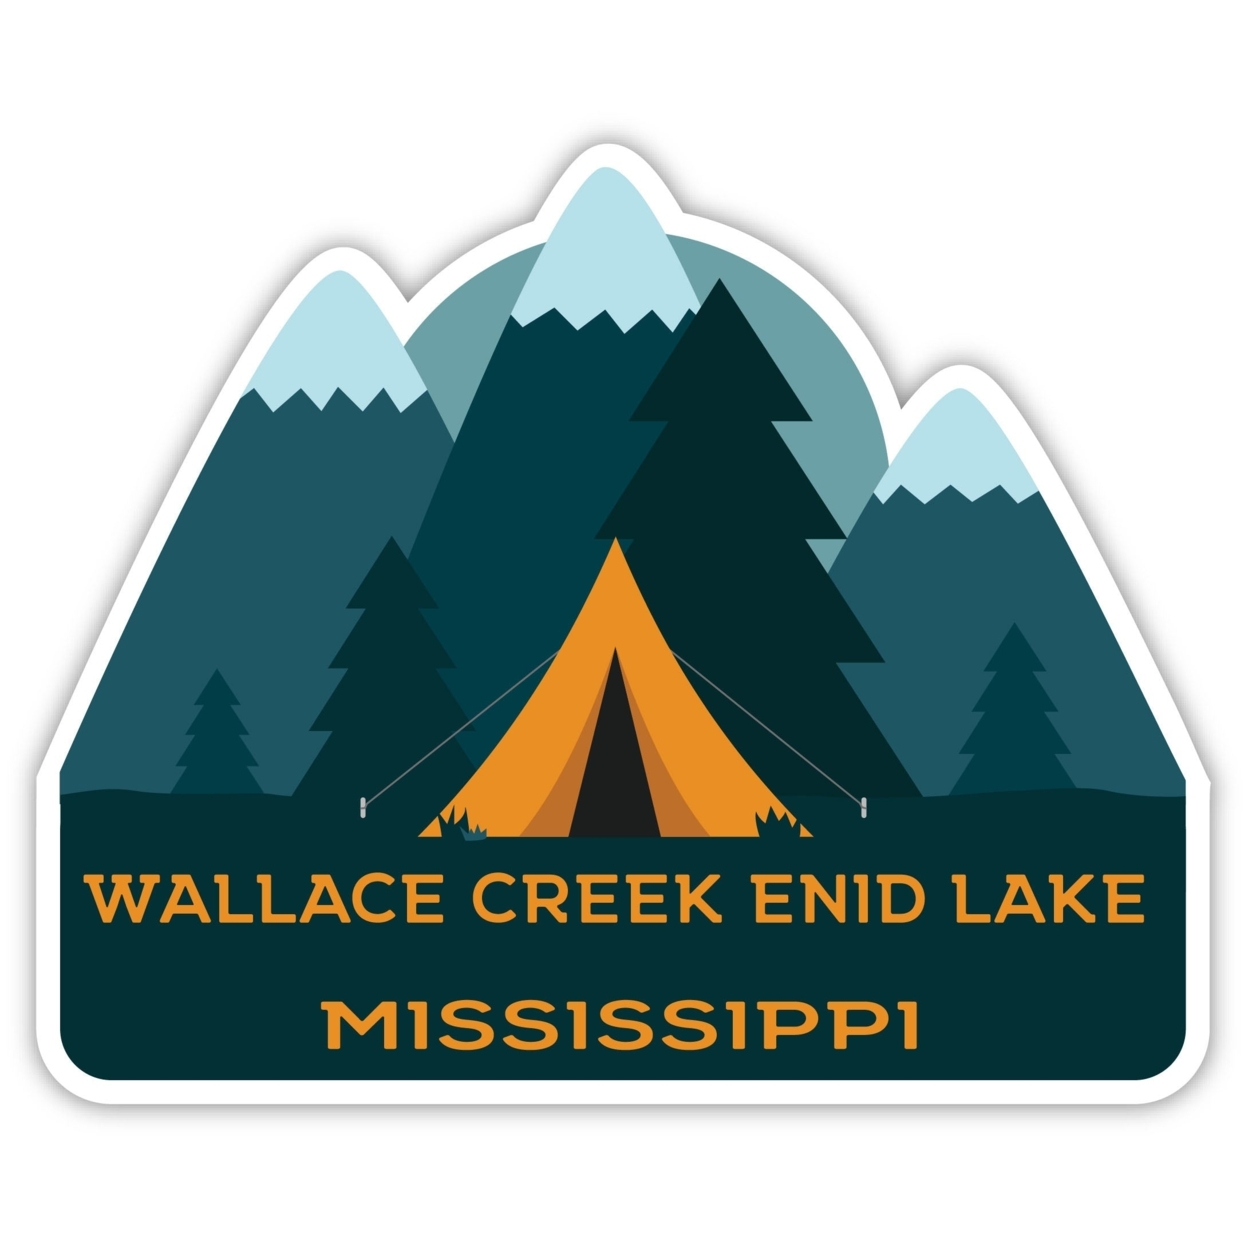 Wallace Creek Enid Lake Mississippi Souvenir Decorative Stickers (Choose Theme And Size) - Single Unit, 2-Inch, Tent